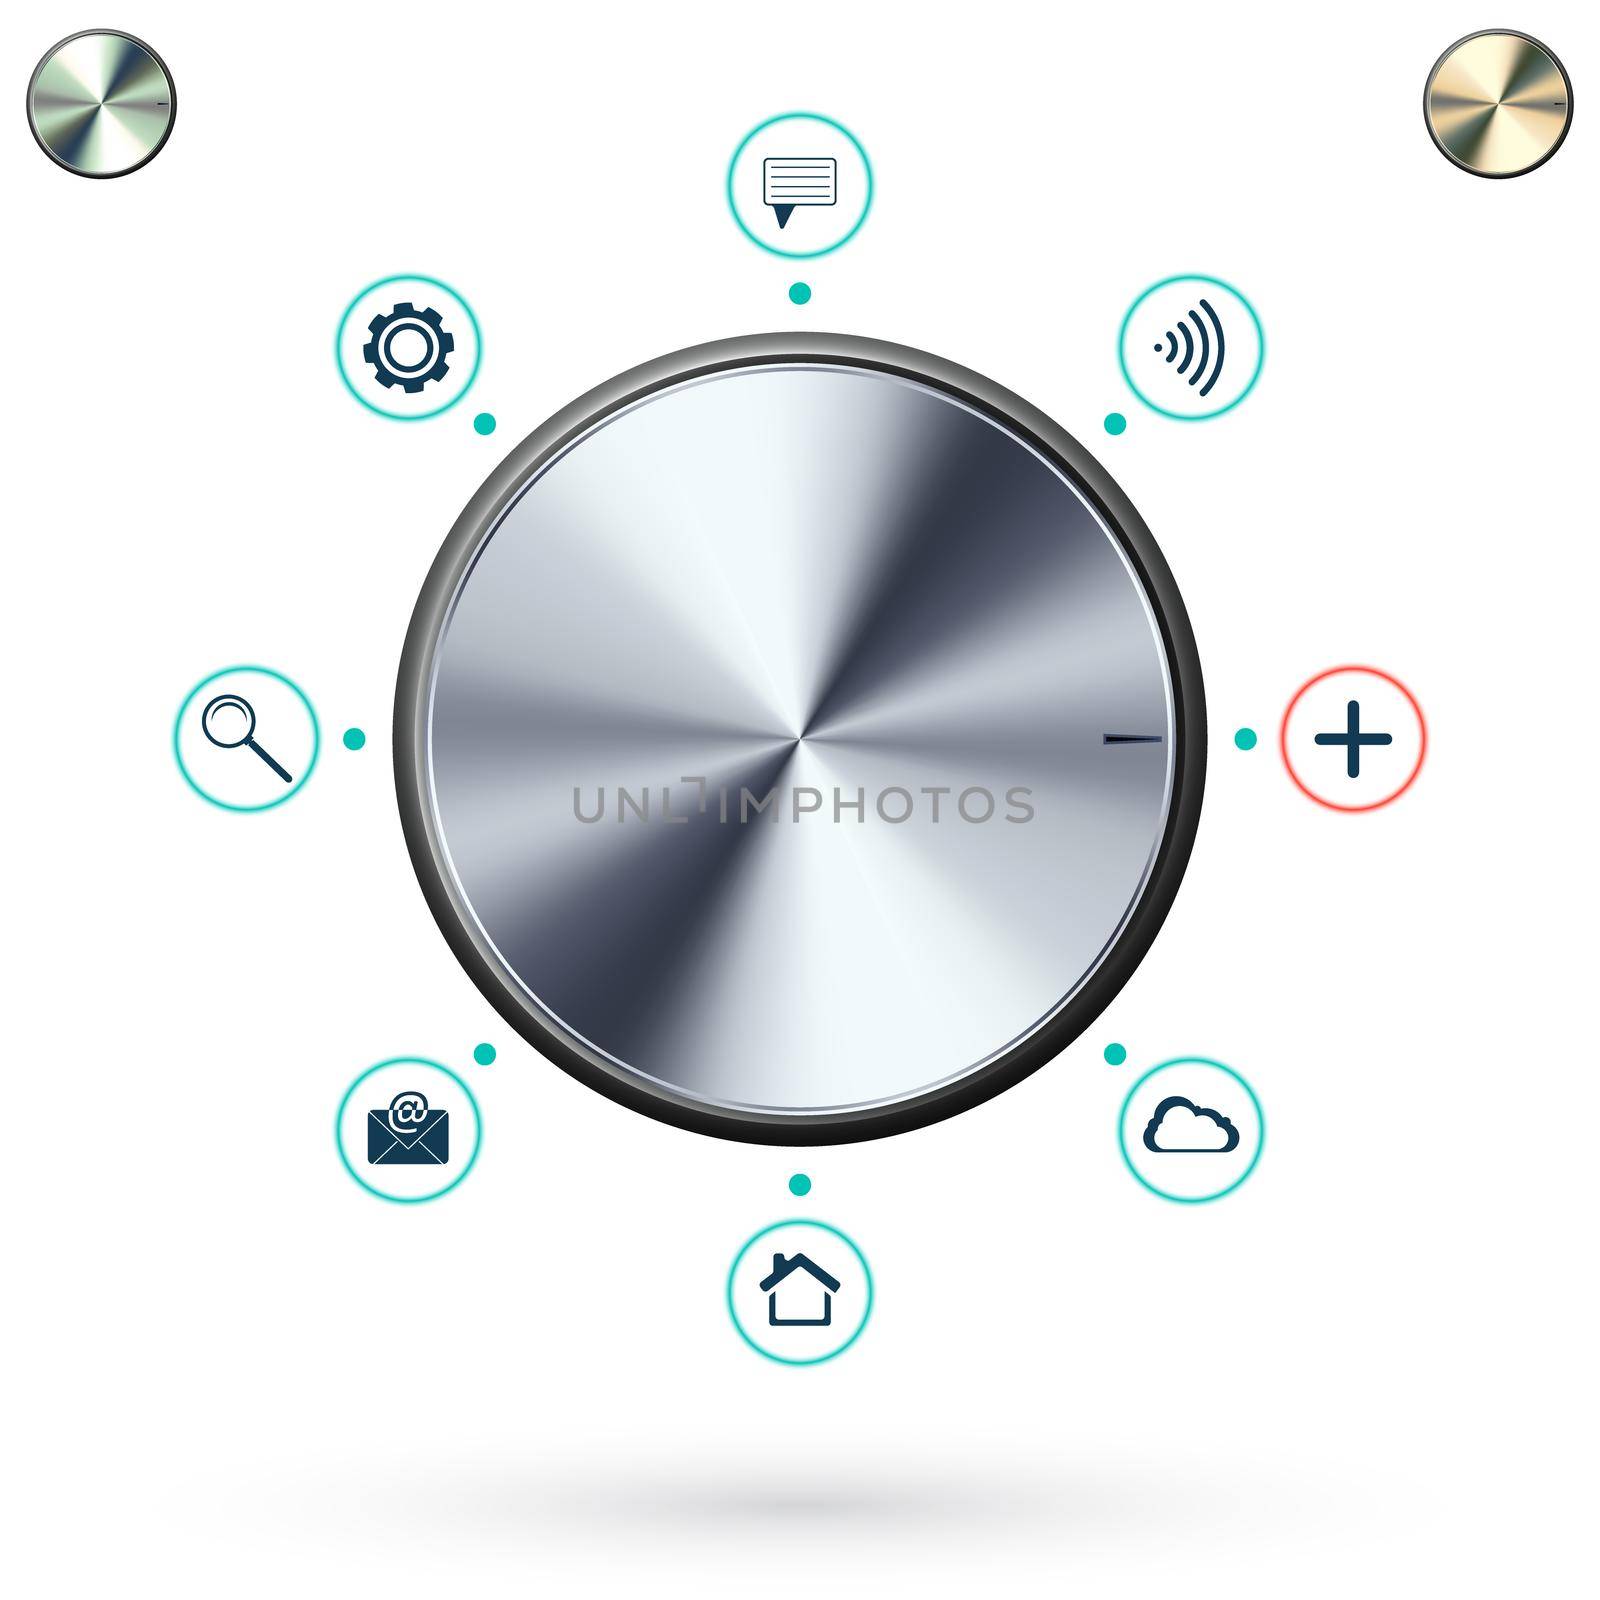 Metallic Button on white background. Knob with Various Social Media icons. Vector illustration.